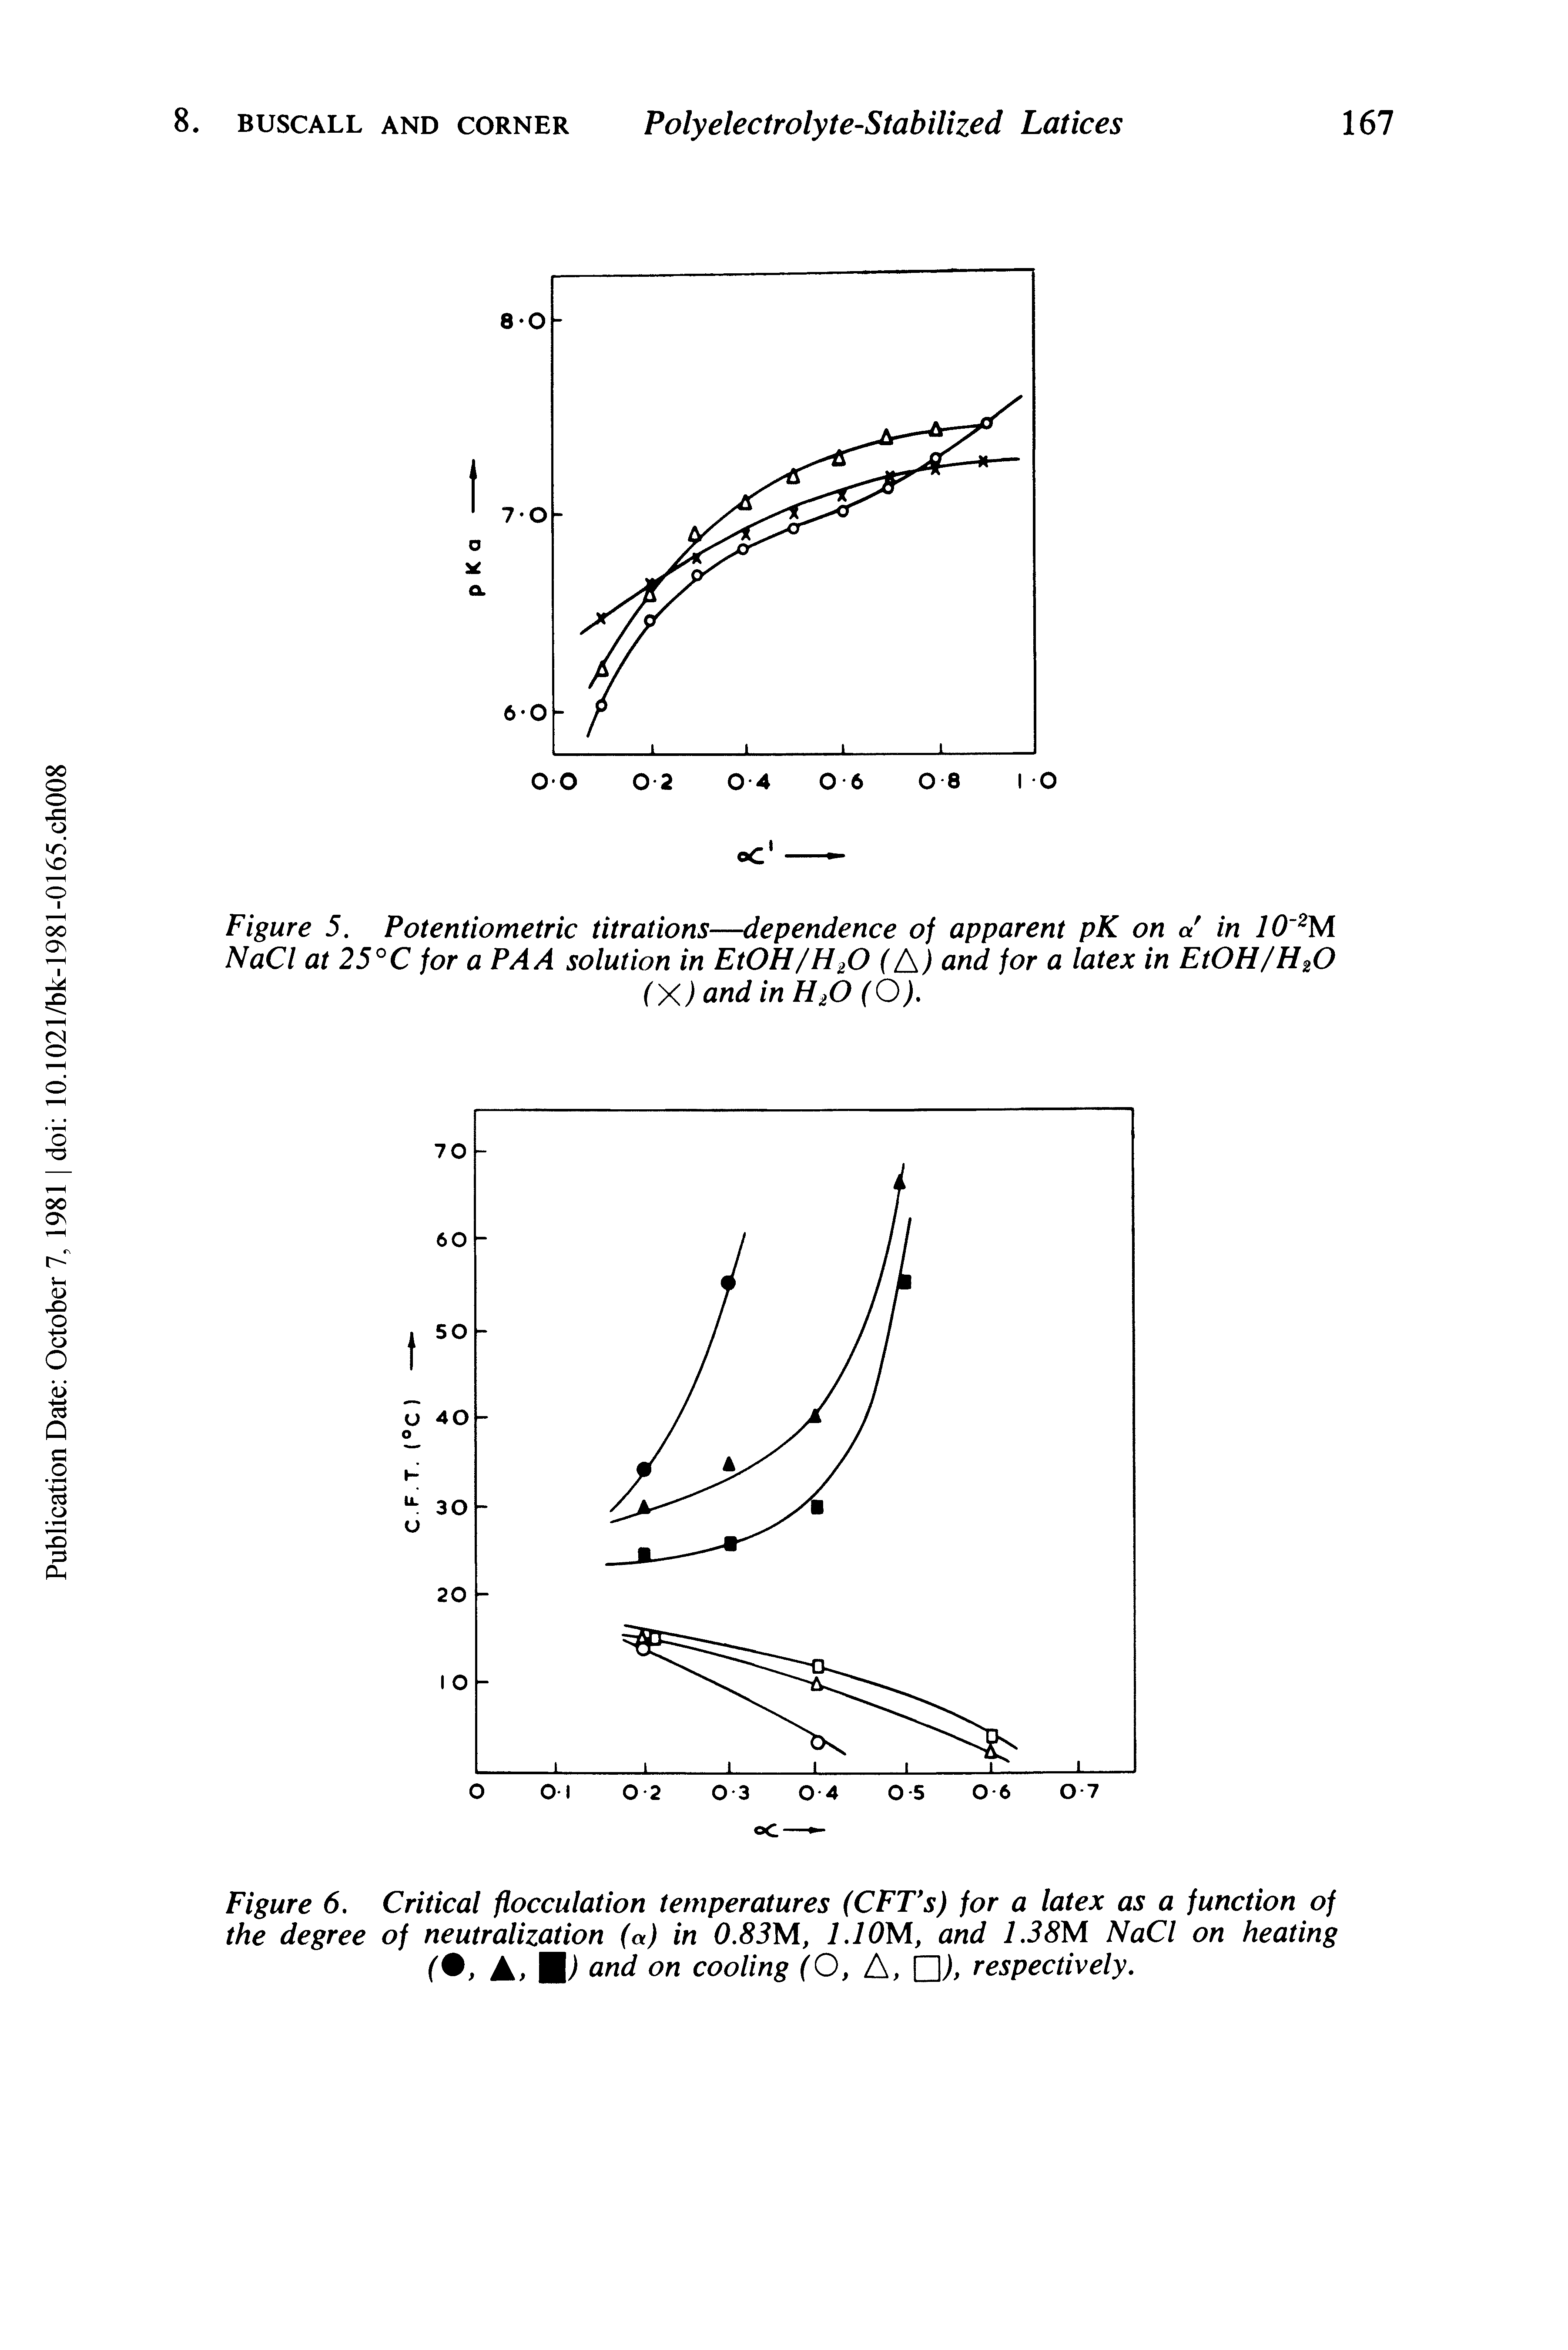 Figure 6. Critical flocculation temperatures (CFVs) for a latex as a function of the degree of neutralization (a) in 0.83M, 1.1 OM, and 1.38M NaCl on heating (, A, M) and on cooling (O, A, Q), respectively.